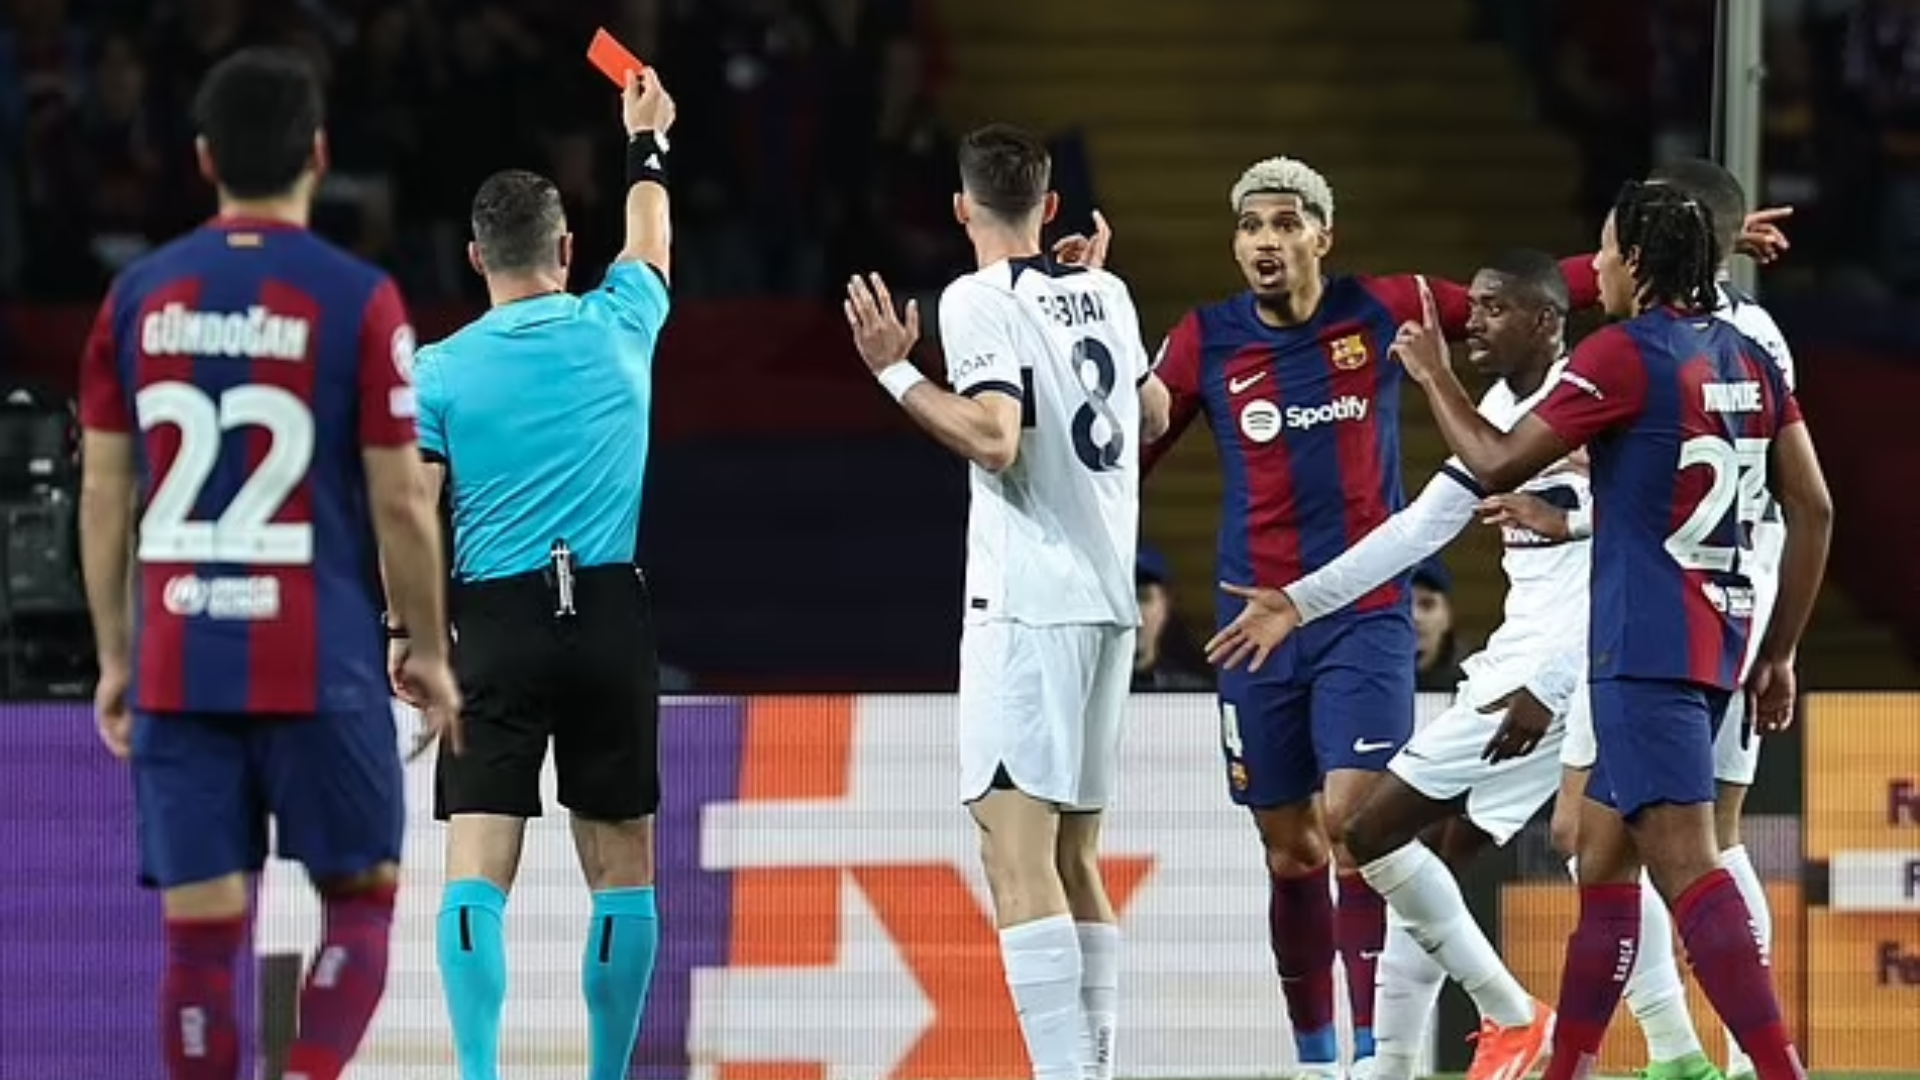 Xavi slams referee as 'Disaster' after Barcelona's 4-1 loss to PSG in Champions League